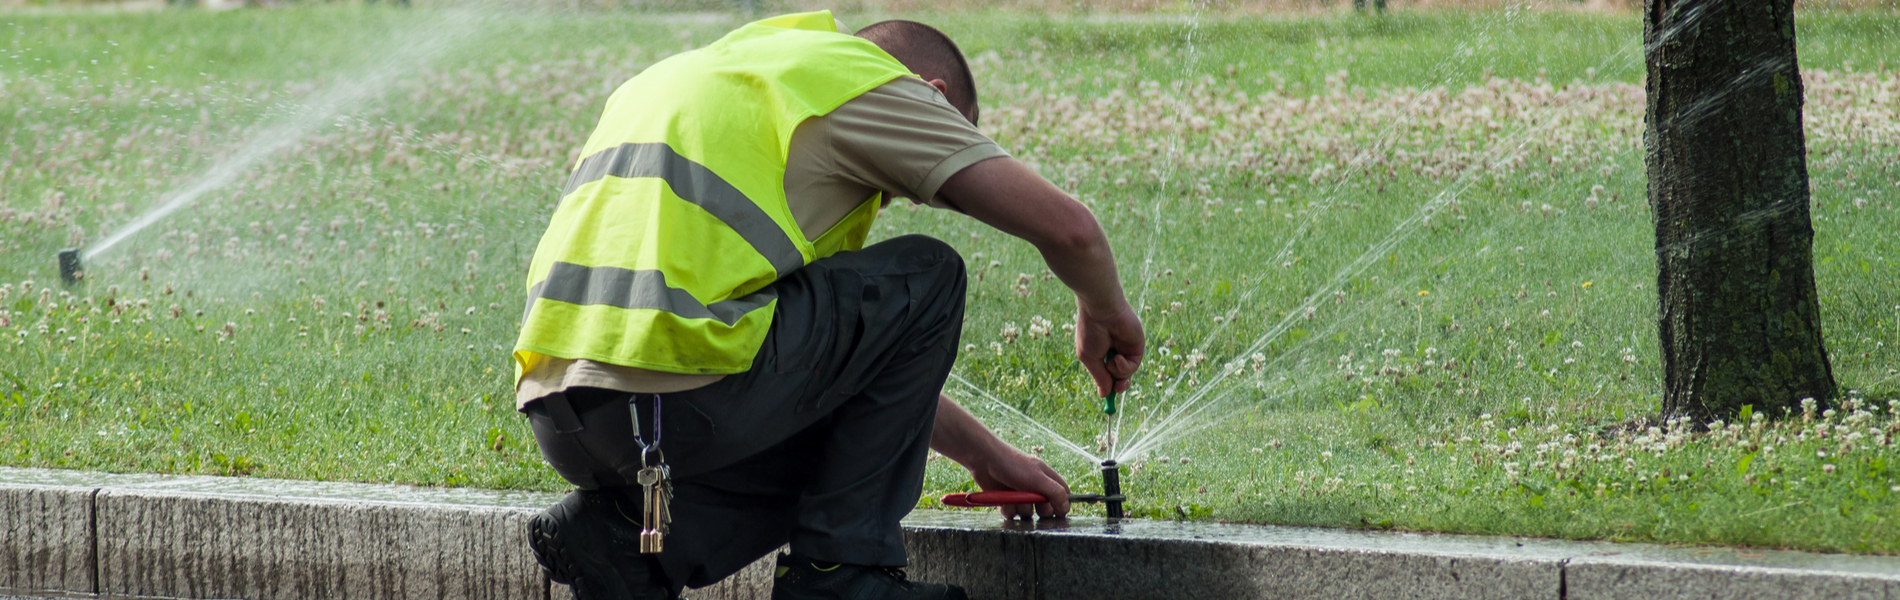 Sprinkler System Installation Ballwin, MO | Ballwin, MO area lawn care | Lawn Sprinklers of St. Louis